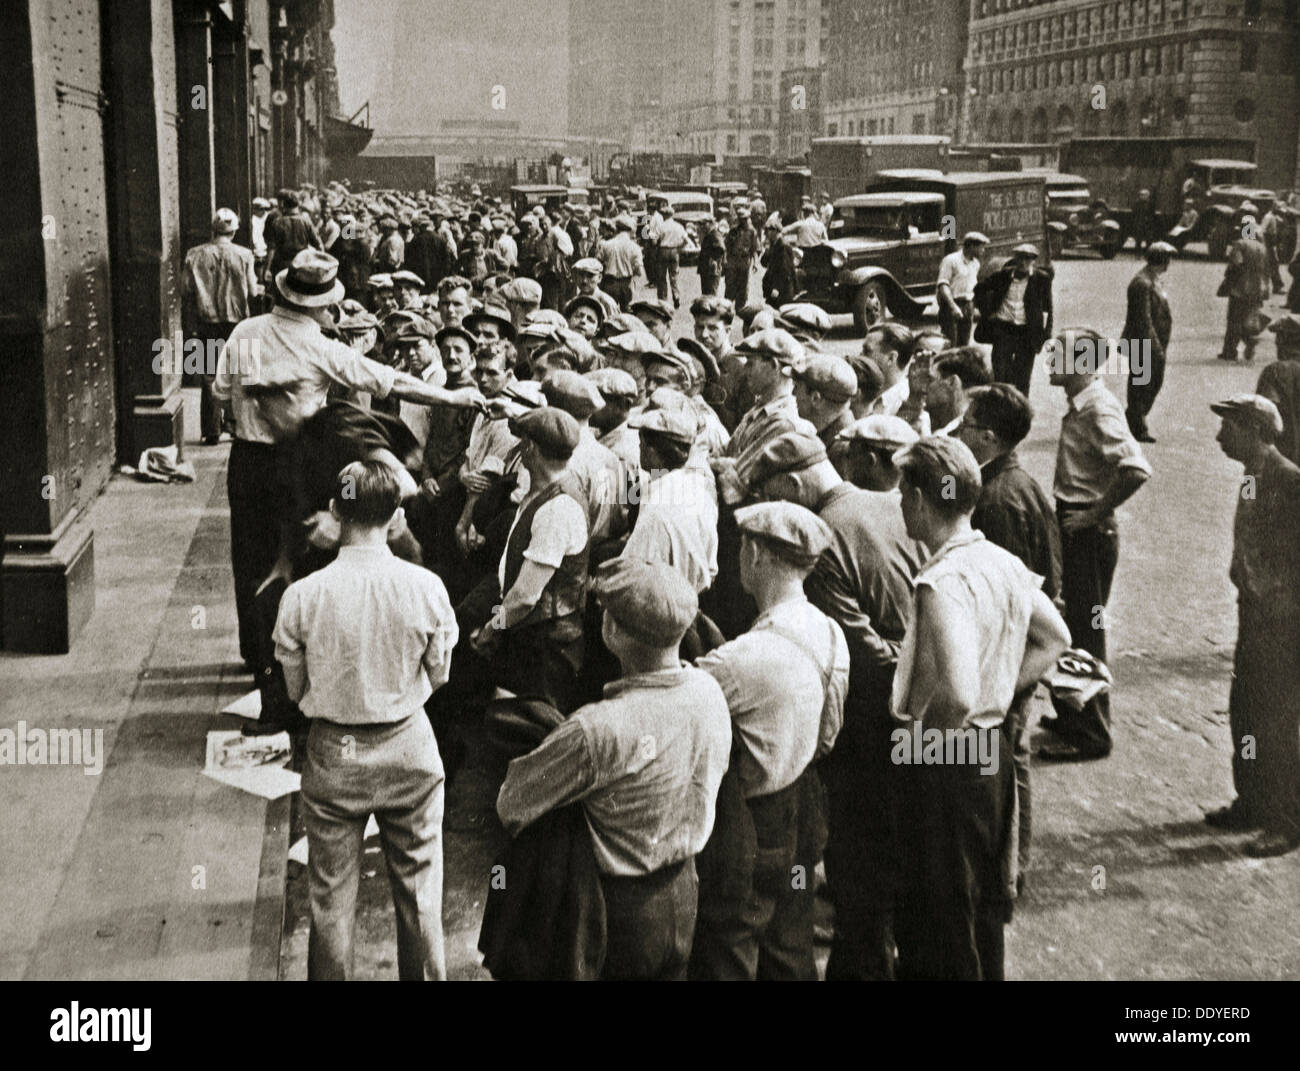 Longshoremen being picked out by a boss, New York, USA, 1920s or 1930s. Artist: Unknown Stock Photo